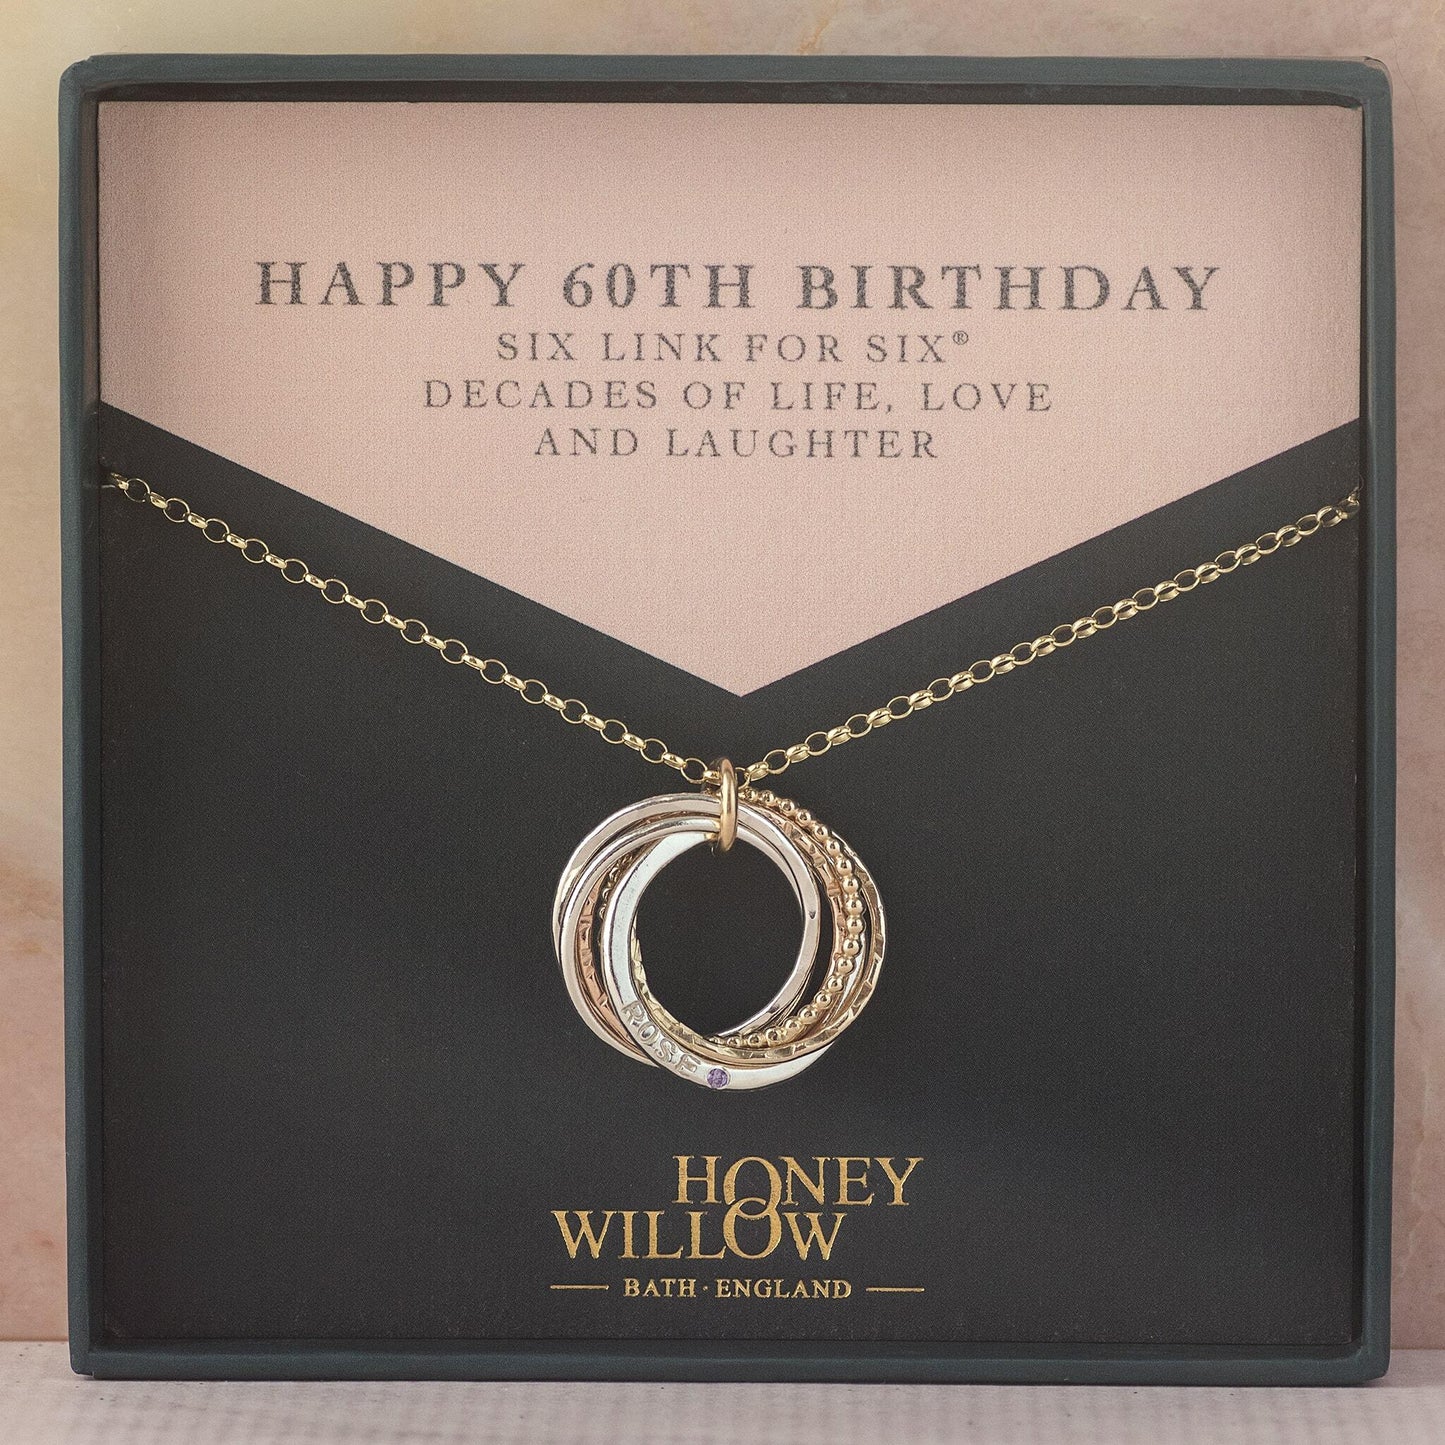 9kt Gold Personalised 60th Birthday Birthstone Necklace - Hand-Stamped - The Original 6 Links for 6 Decades Necklace - Recycled Rose Gold, Recycled Yellow Gold & Silver